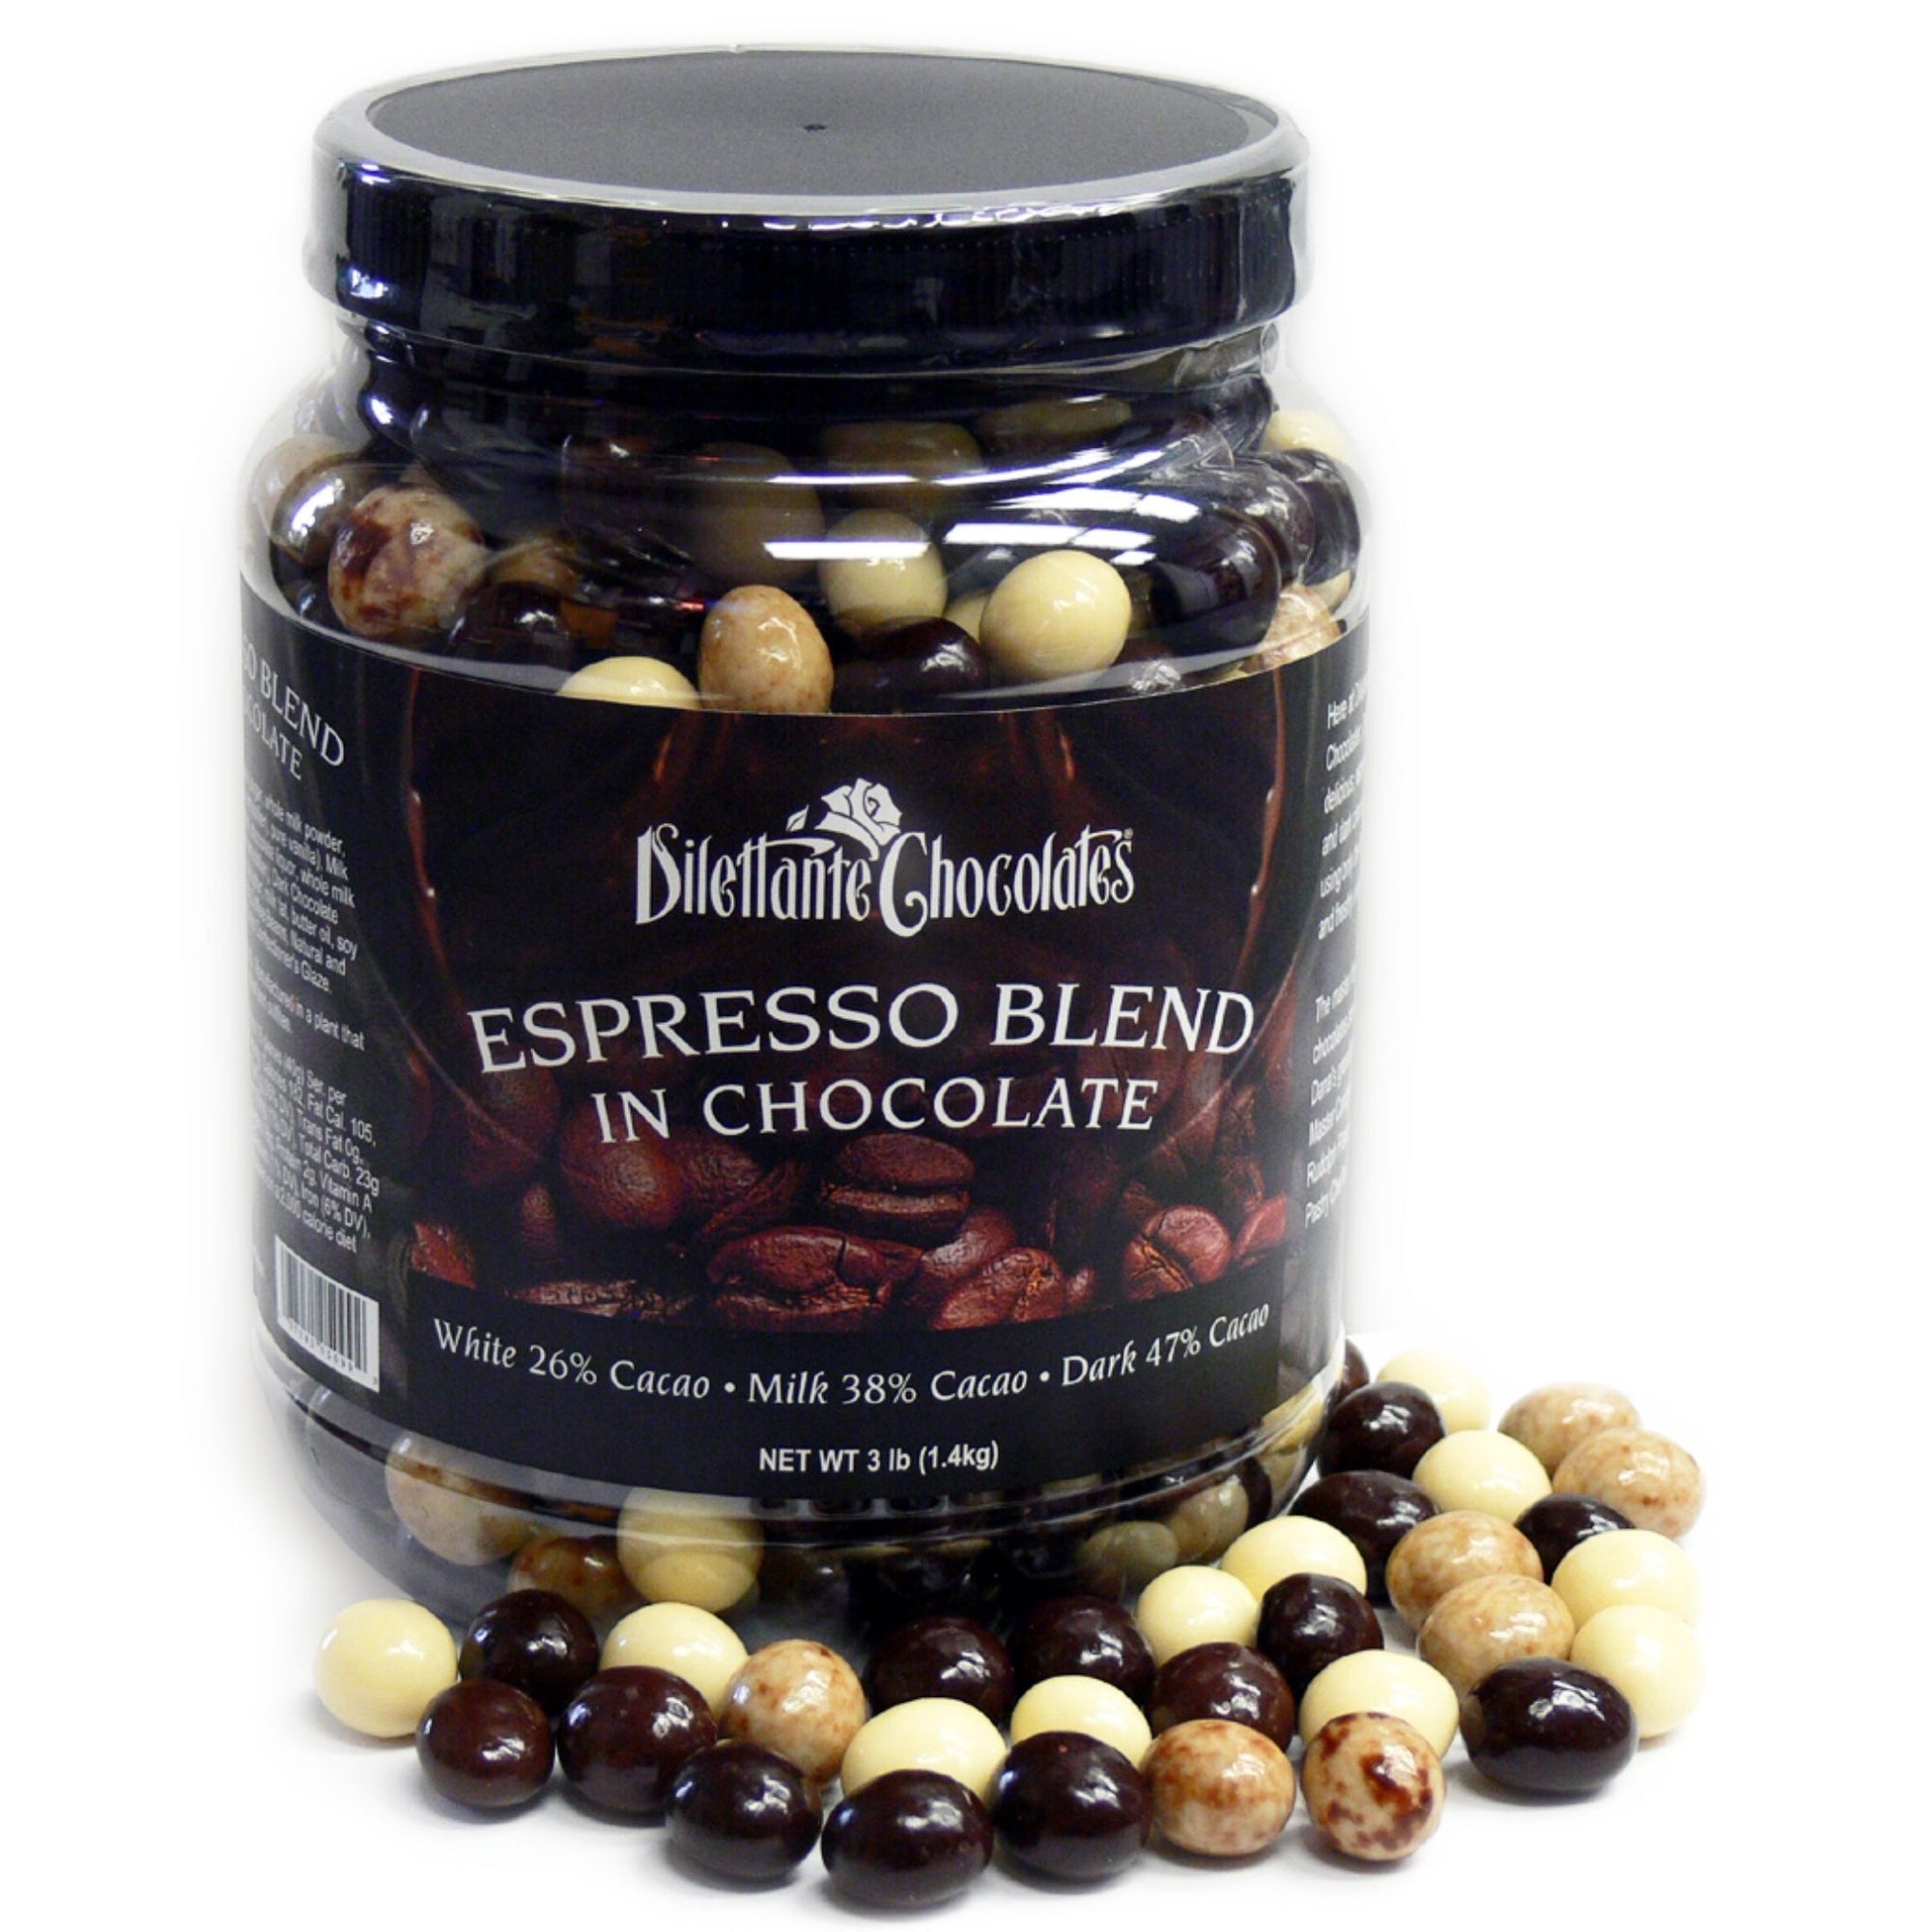 Cacao Barry Chocolate Coffee Beans - Bulk or Wholesale – Bakers